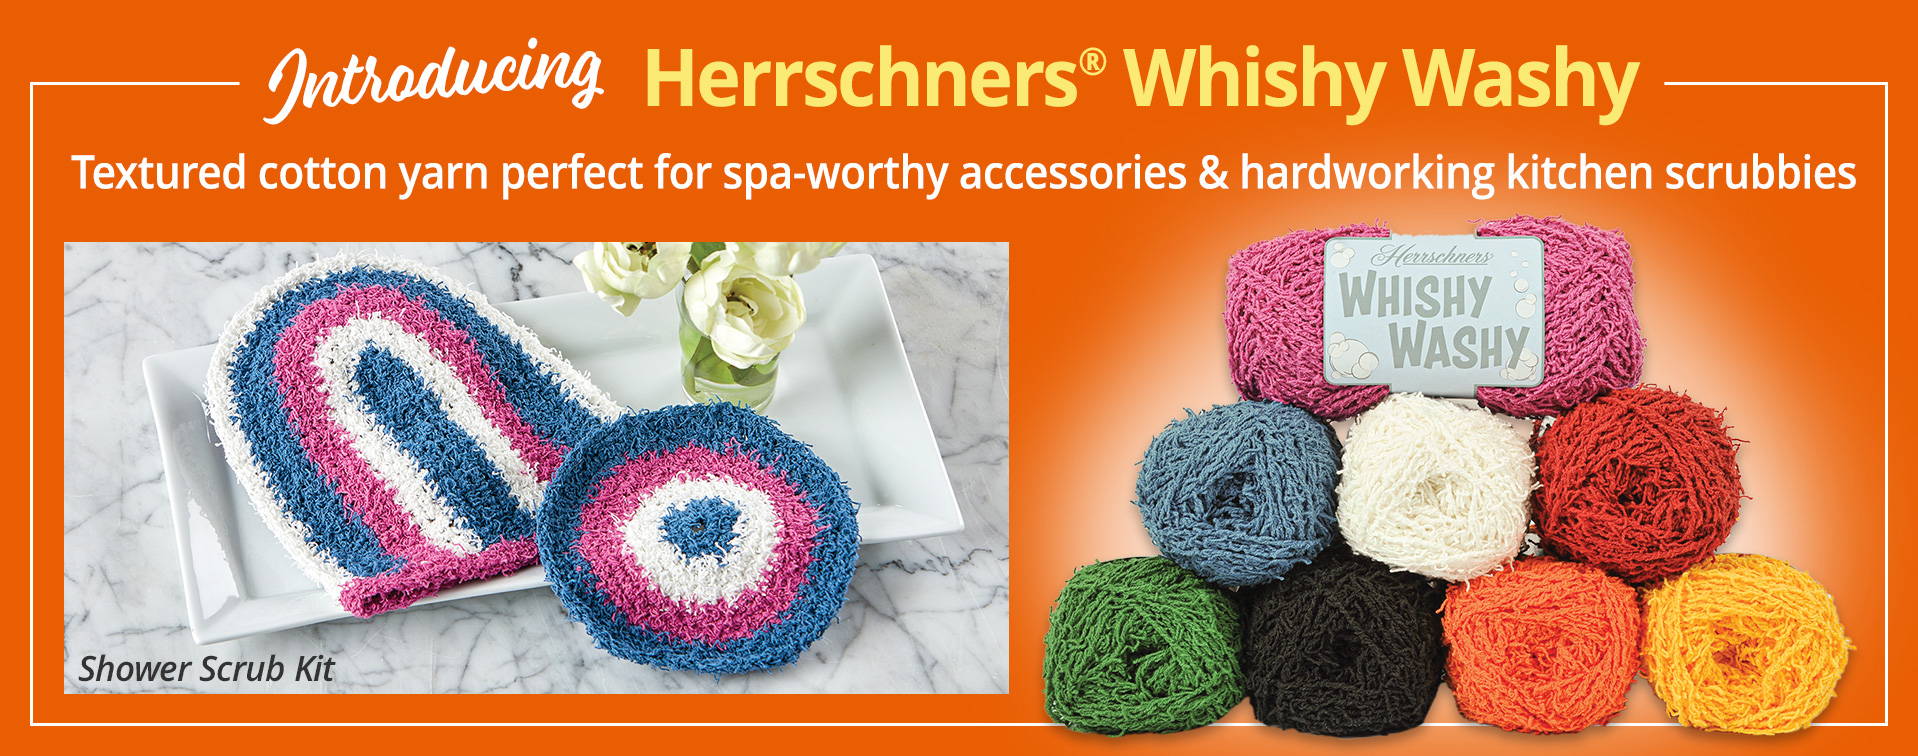 Introducing Herrschners Whishy Washy™ Textured cotton yarn perfect for spa-worthy accessories and hardworking kitchen scrubbies.